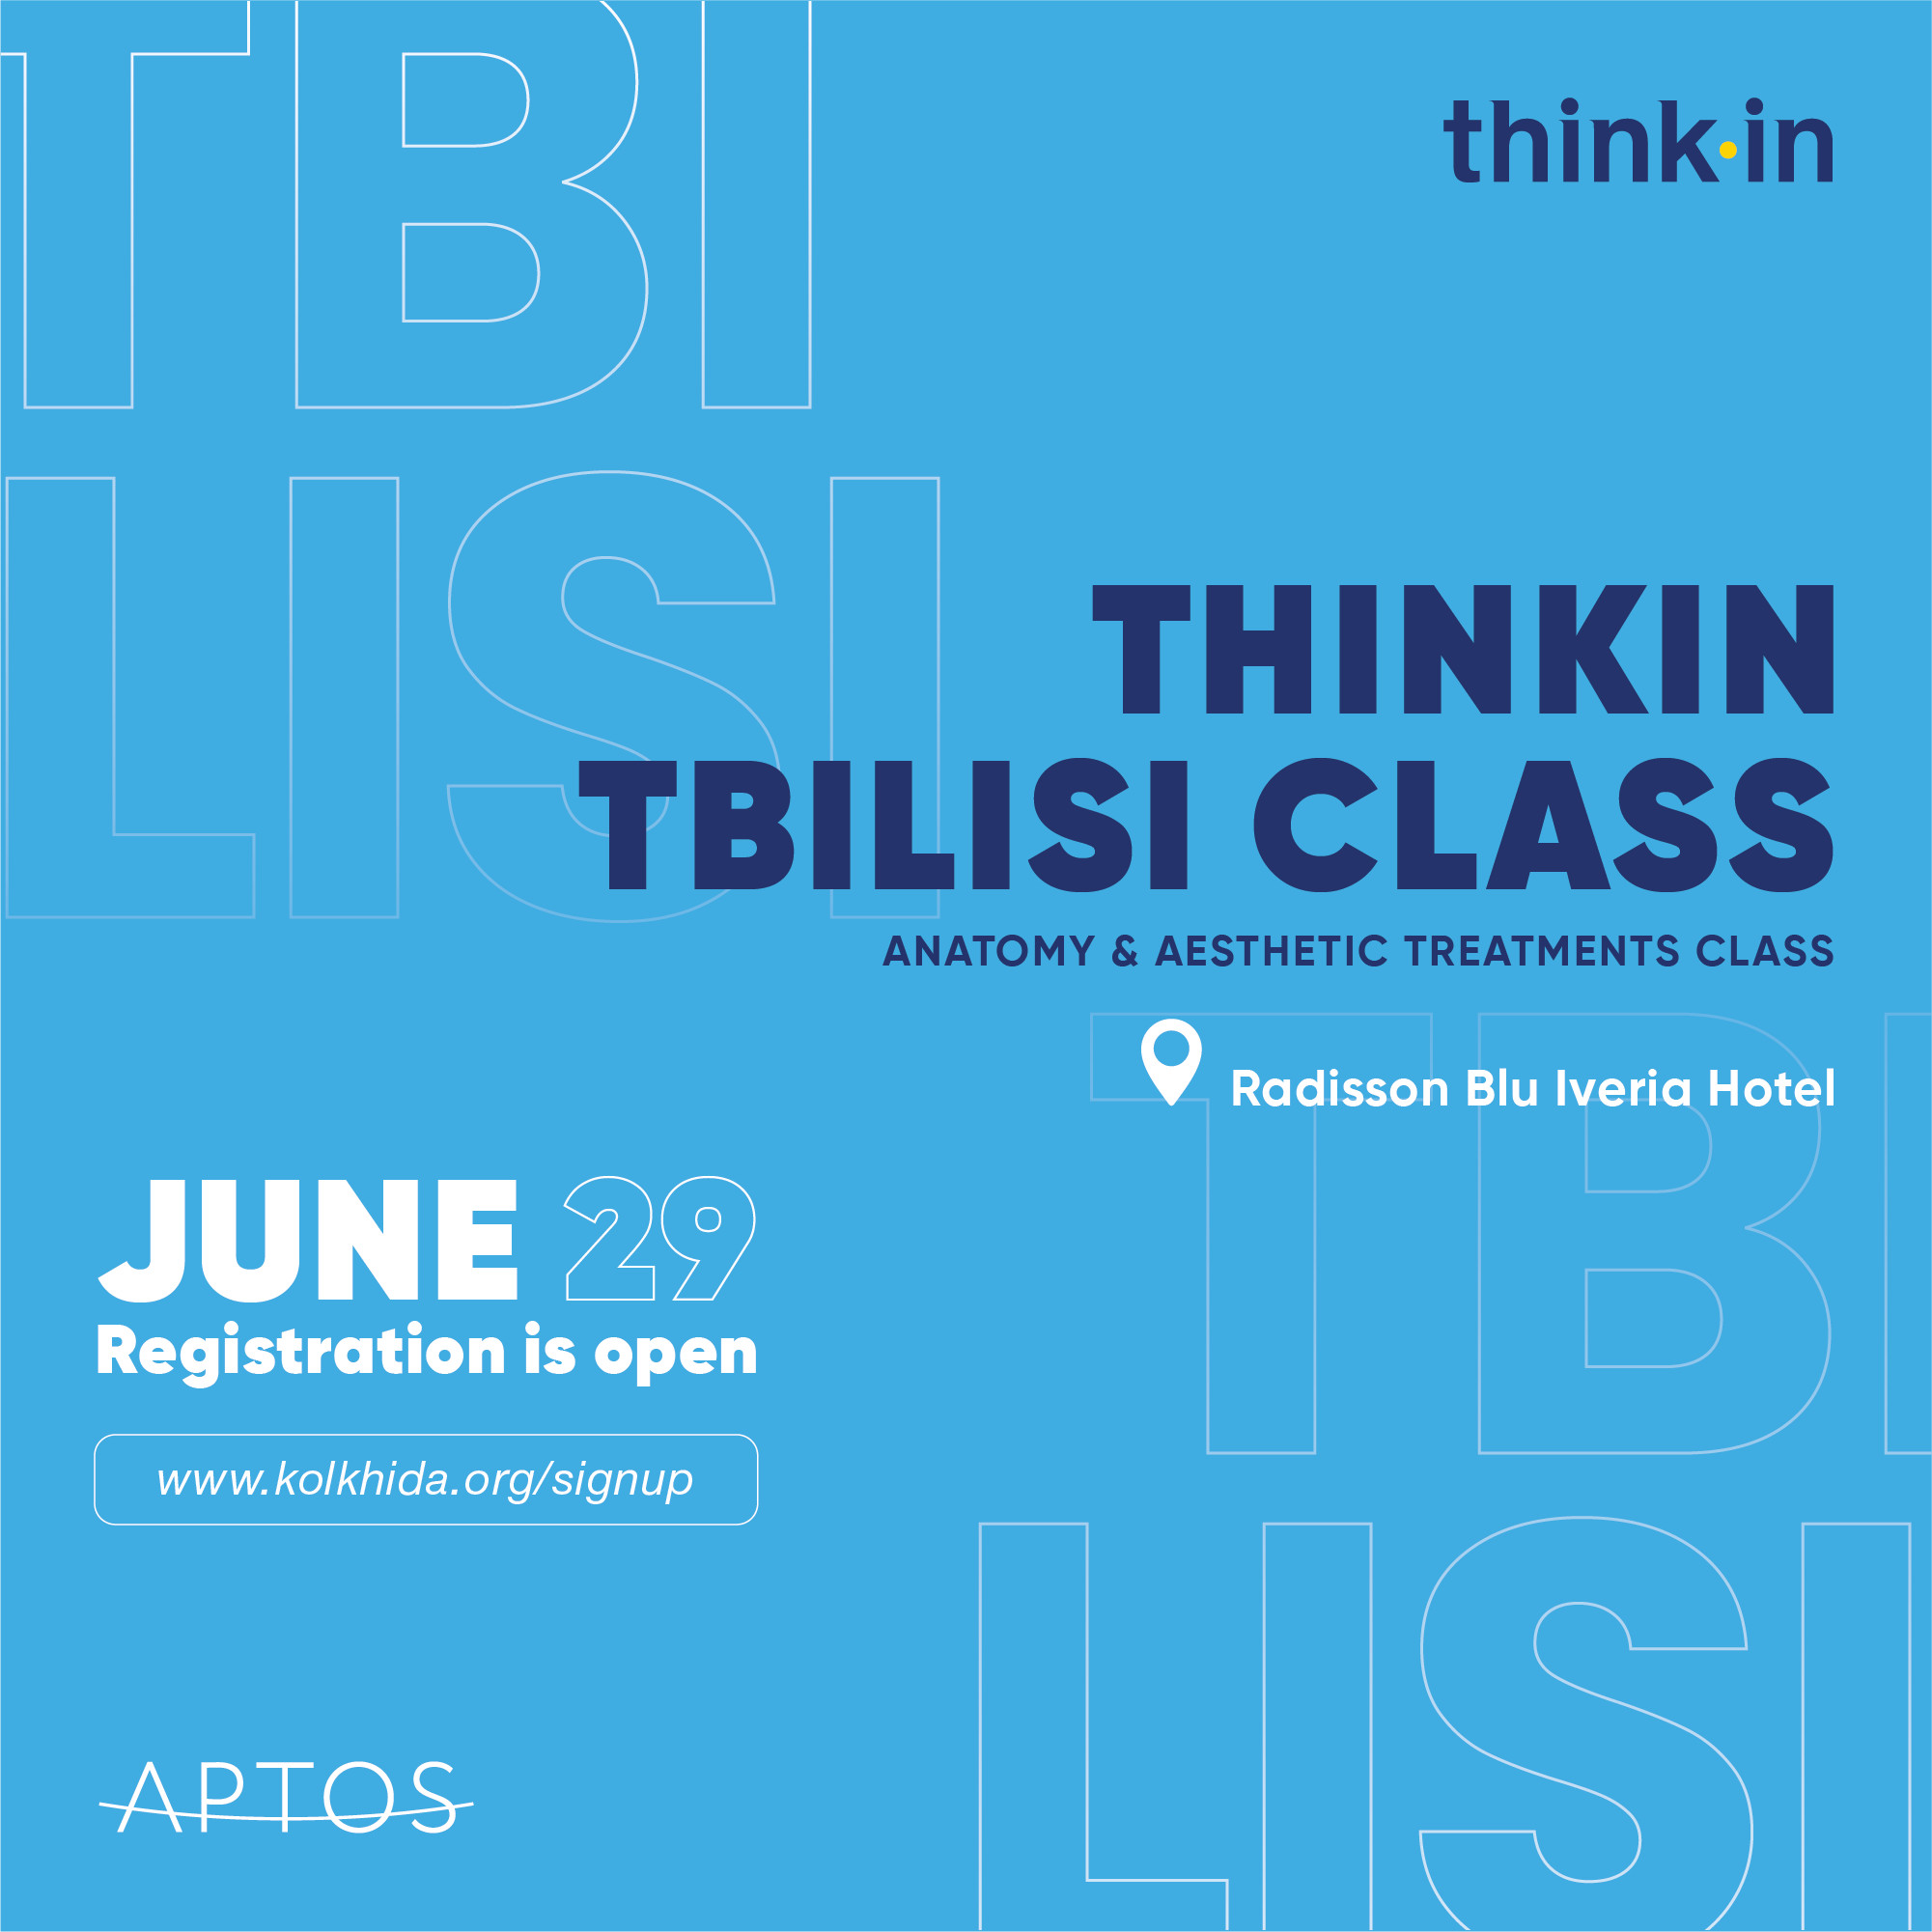 THINK.IN Tbilisi Class | June 29